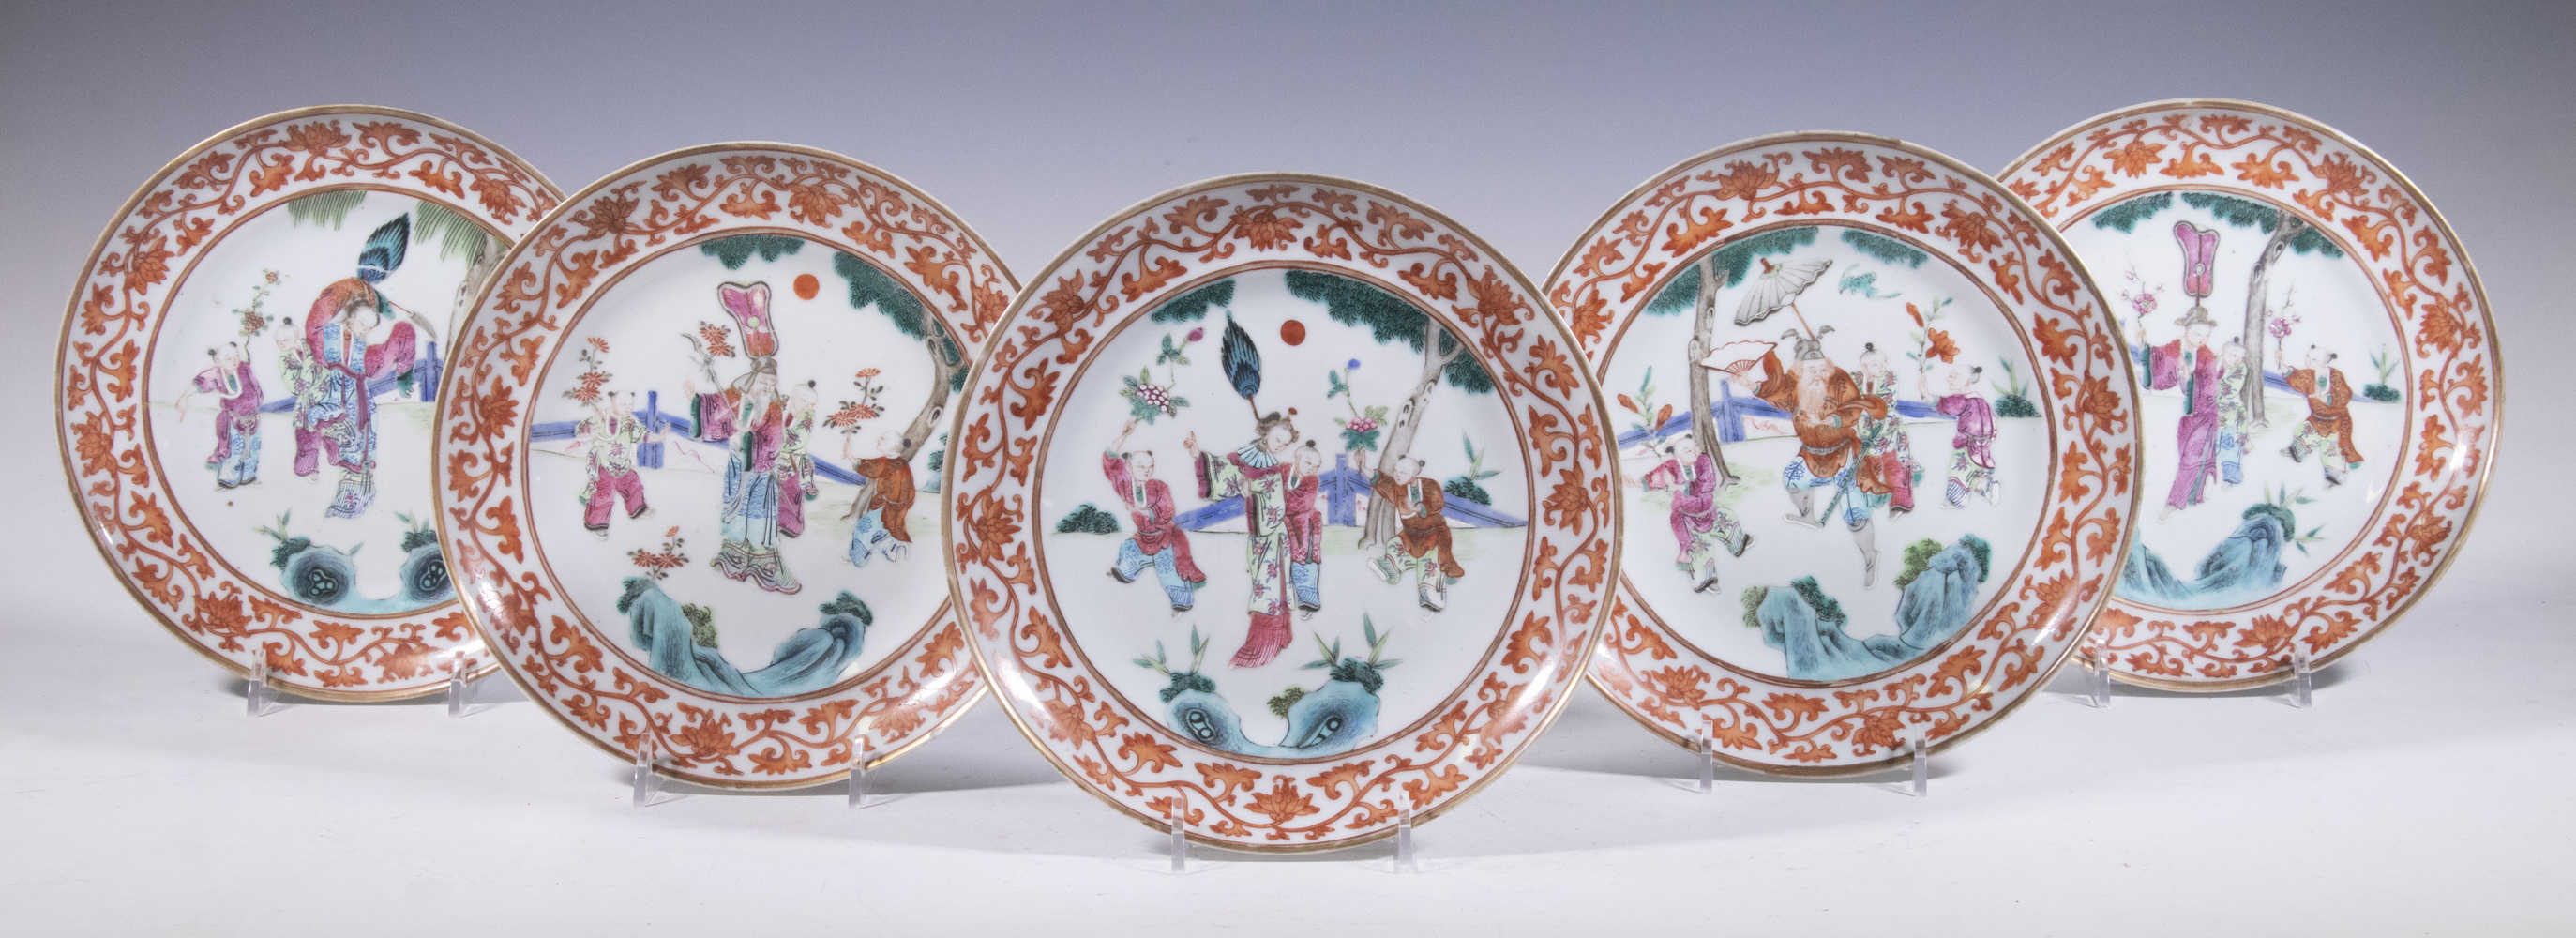 CHINESE PORCELAIN PLATES Set of 302f36